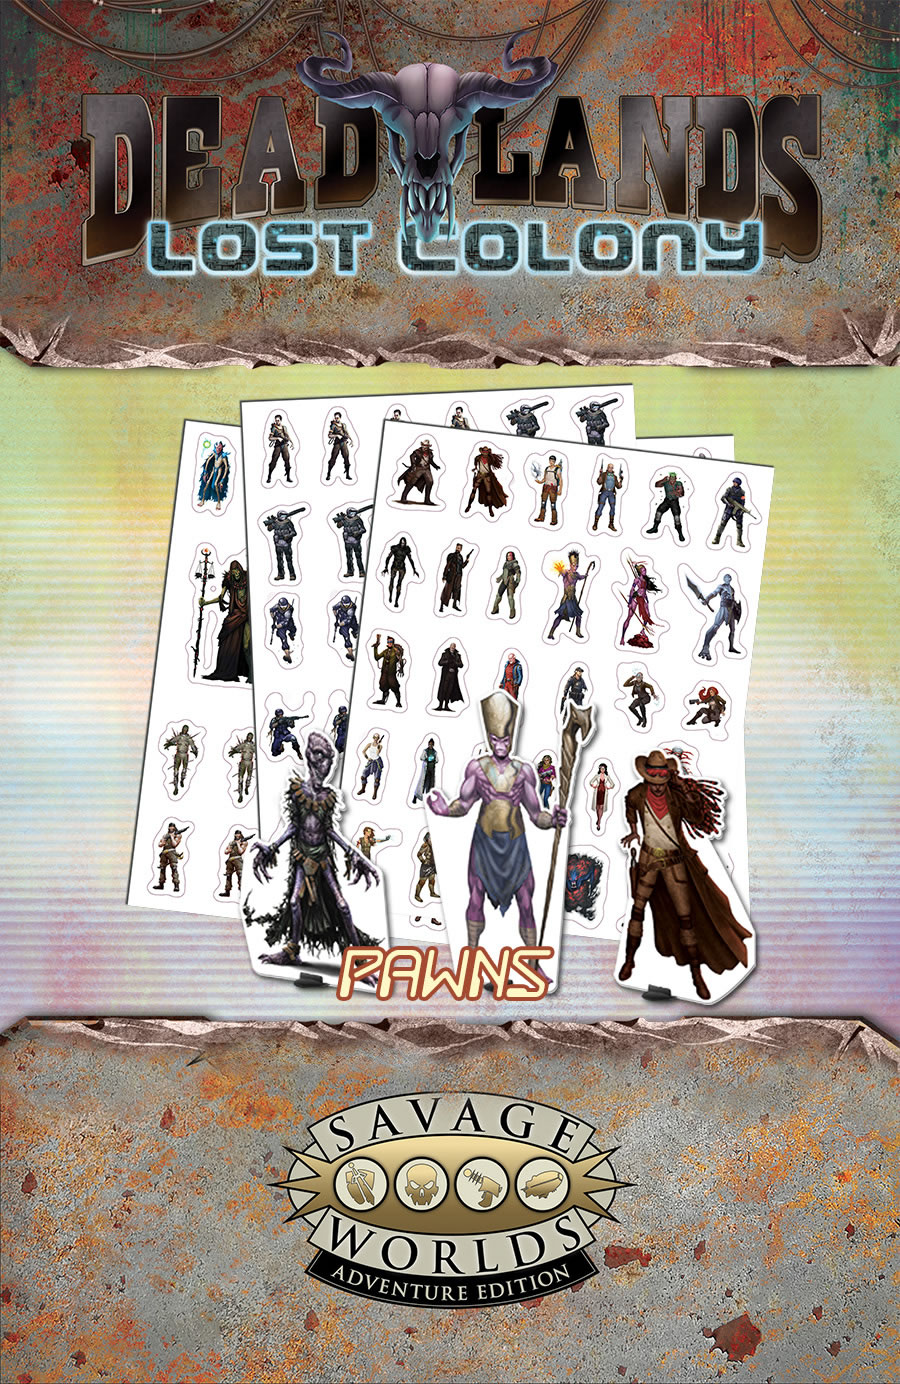 Deadlands: Lost Colony: Pawns 